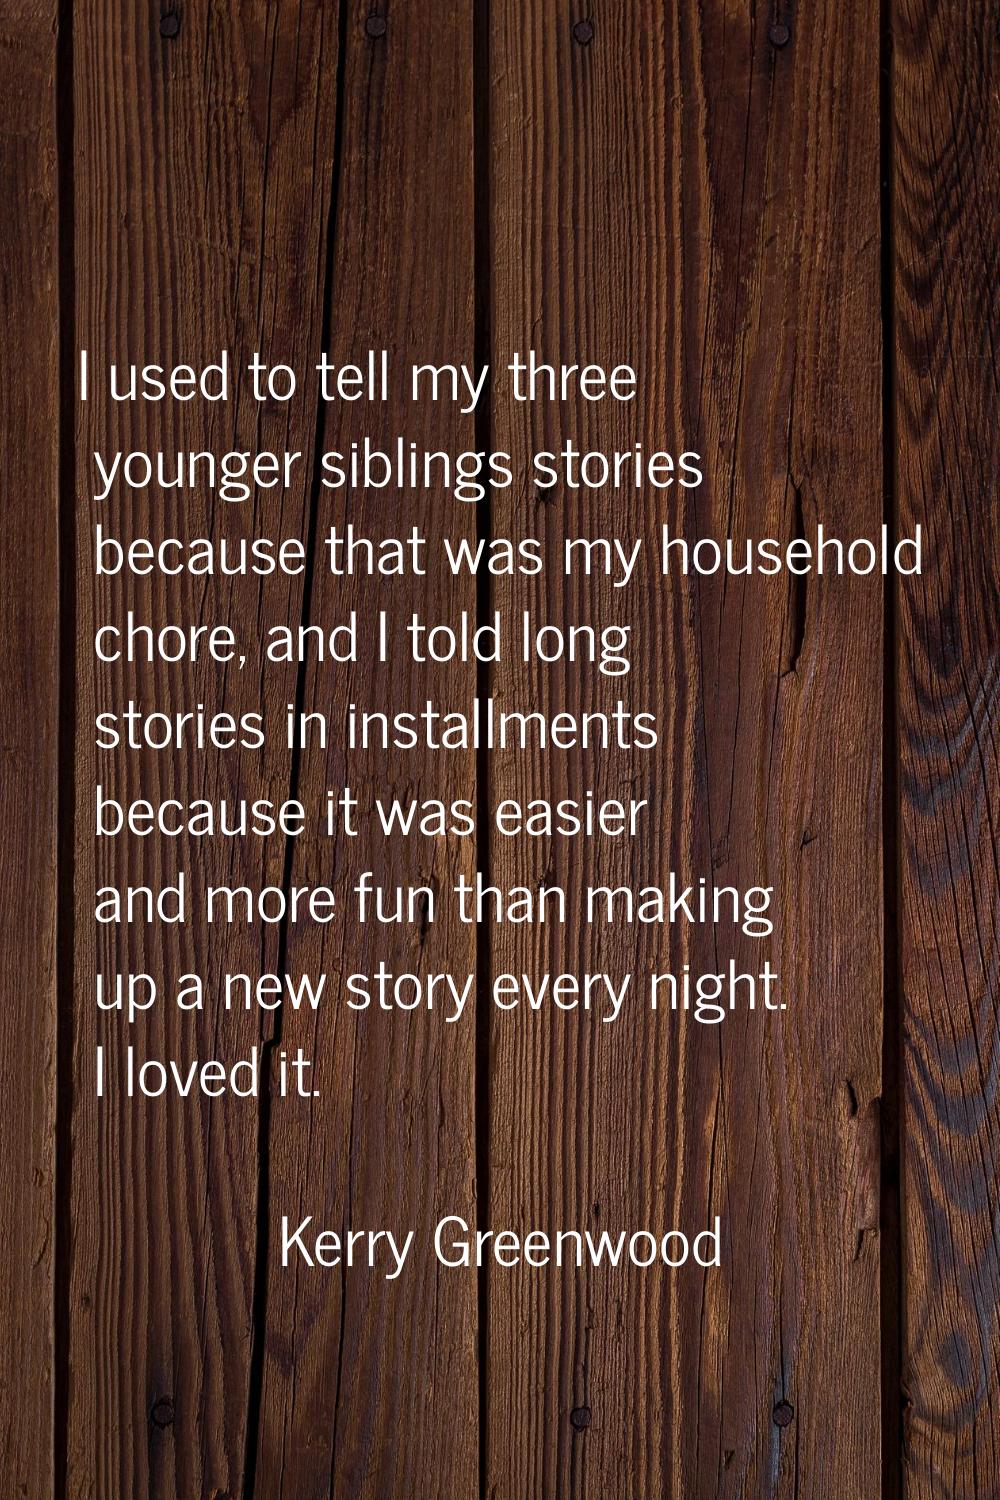 I used to tell my three younger siblings stories because that was my household chore, and I told lo